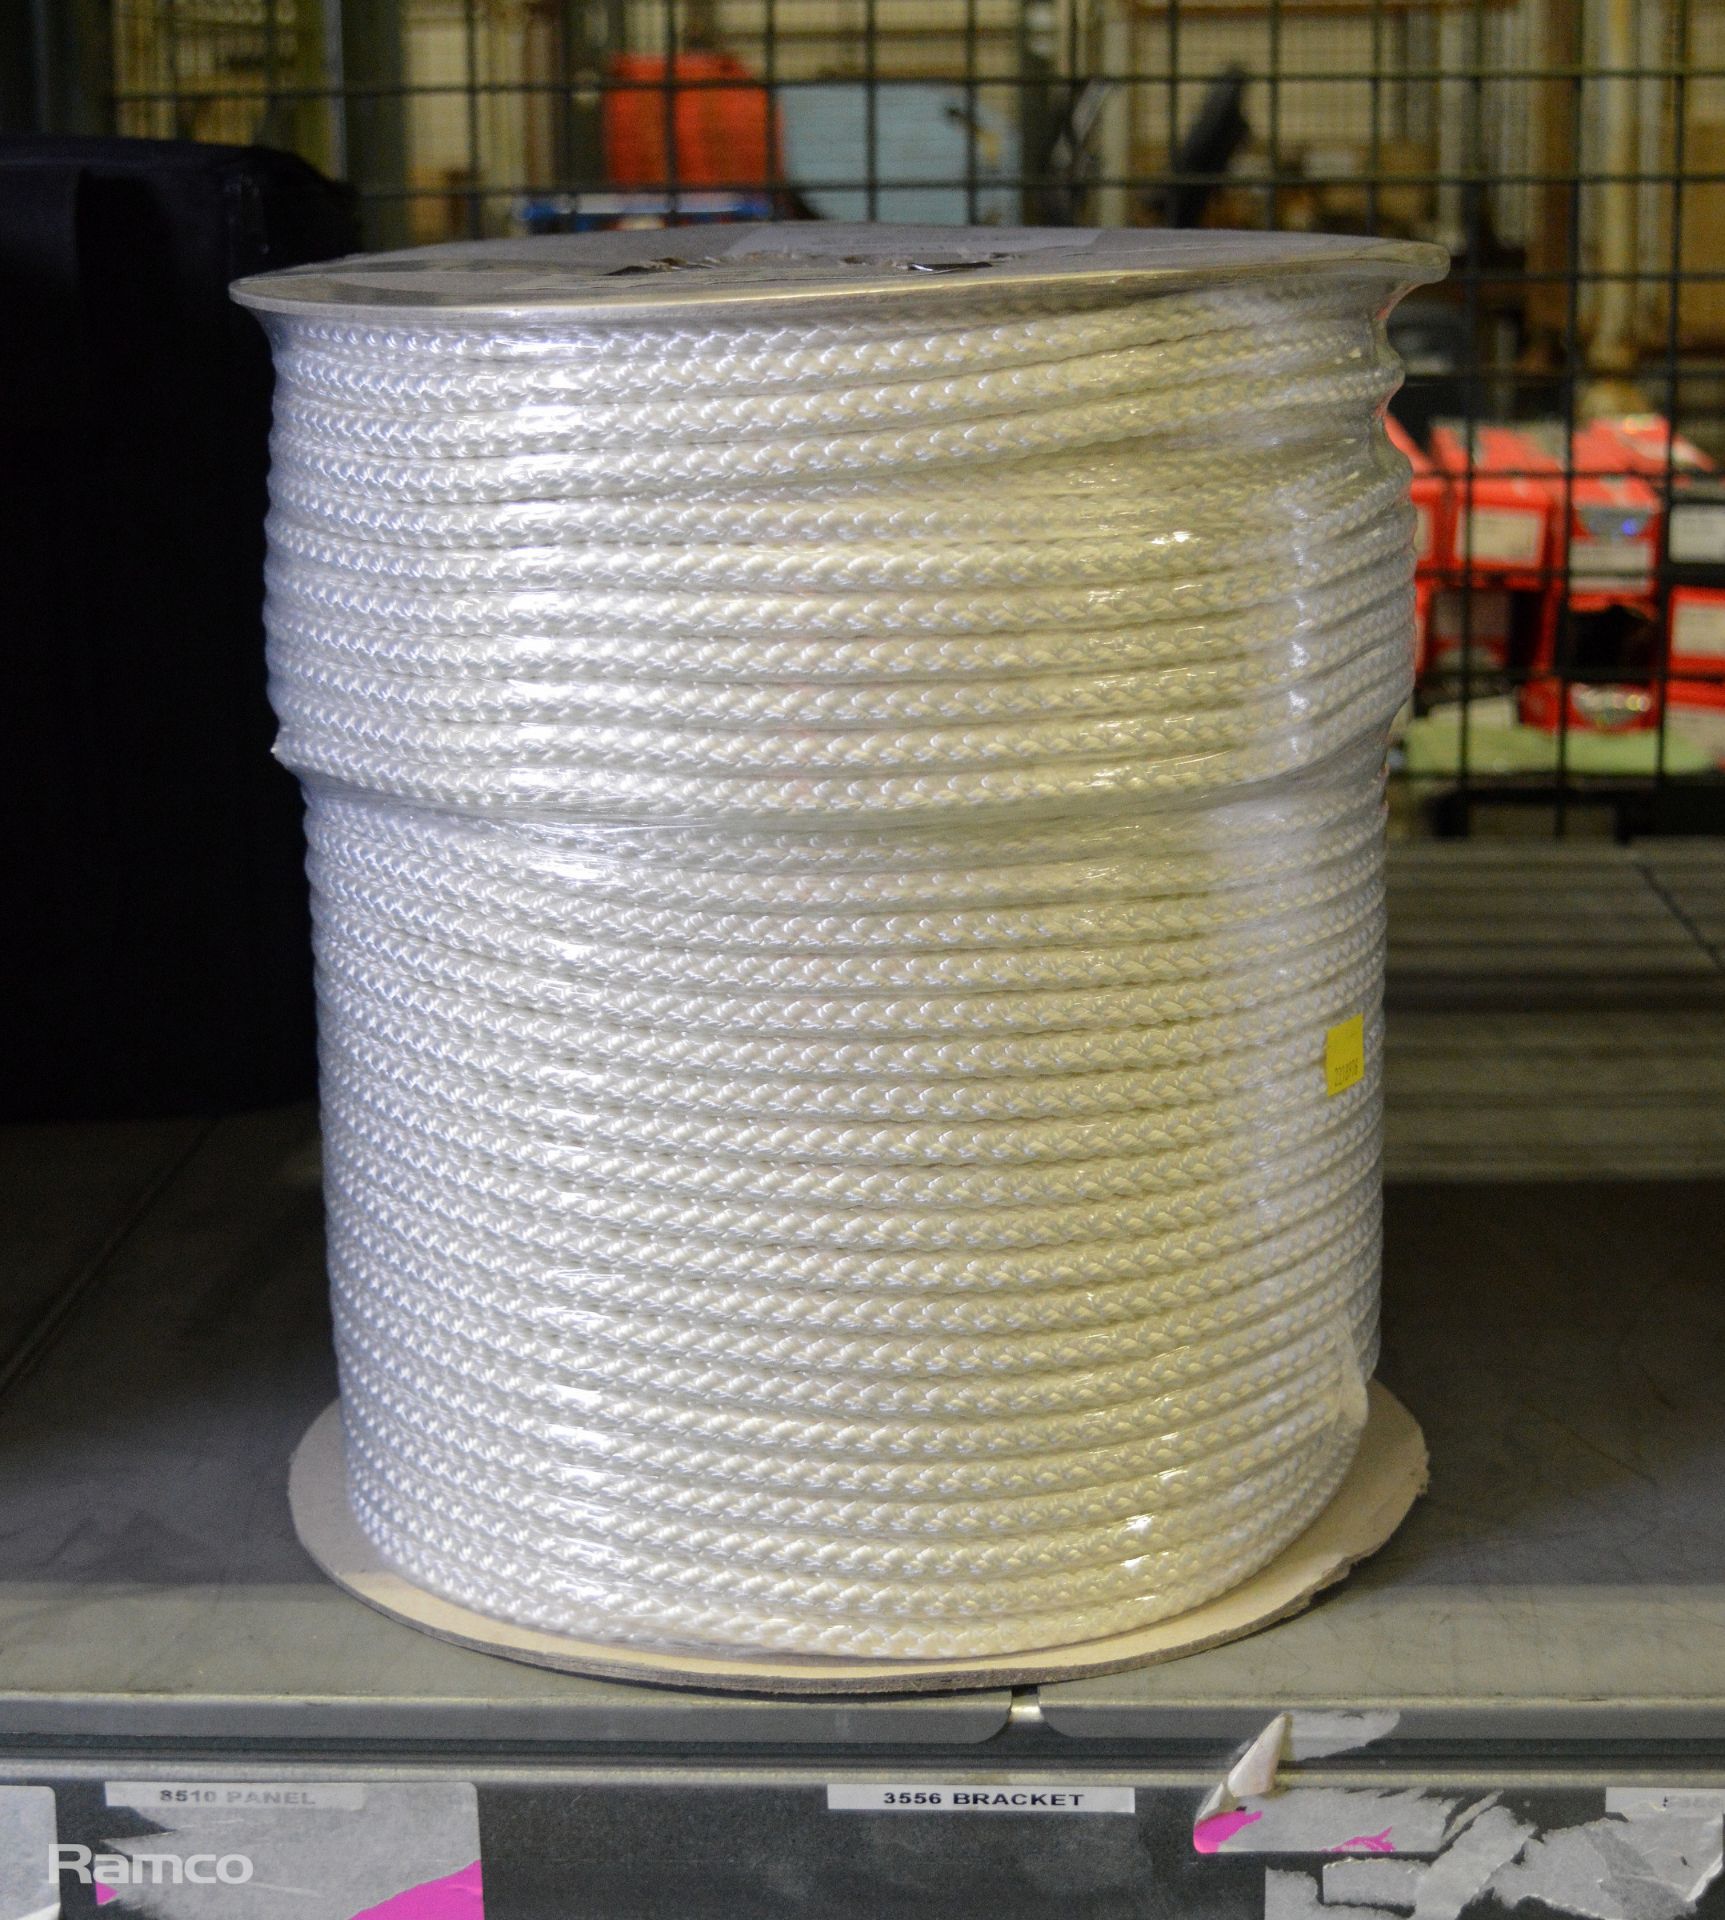 White Poly Fibrous Rope 220m x 9mm - NSN 4020-99-120-8692 - weight 12kg